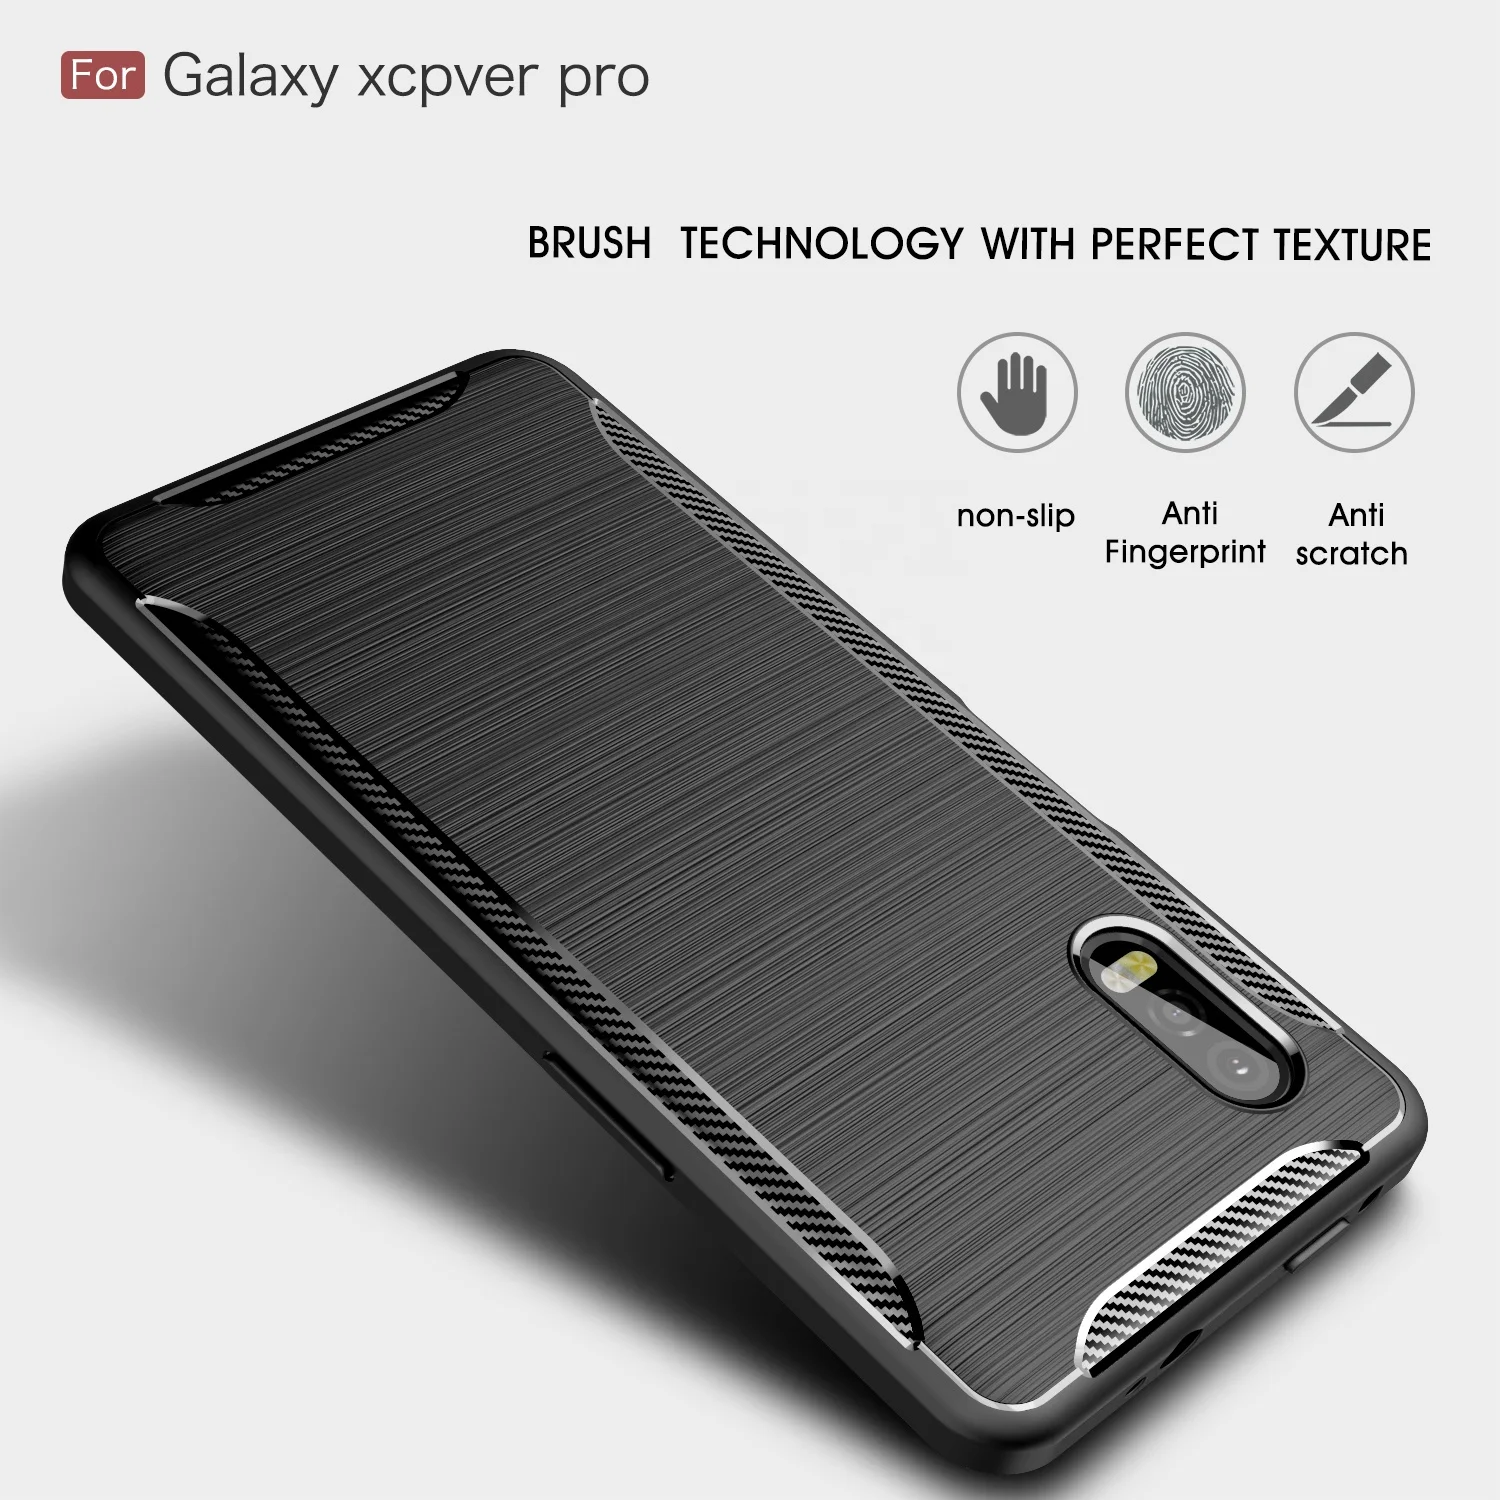 

Thin Slim Carbon Fiber Soft TPU Brushed Texture Protective Mobile Phone Back Cover Case For Samsung galaxy x cover pro, Multi-color, can be customized